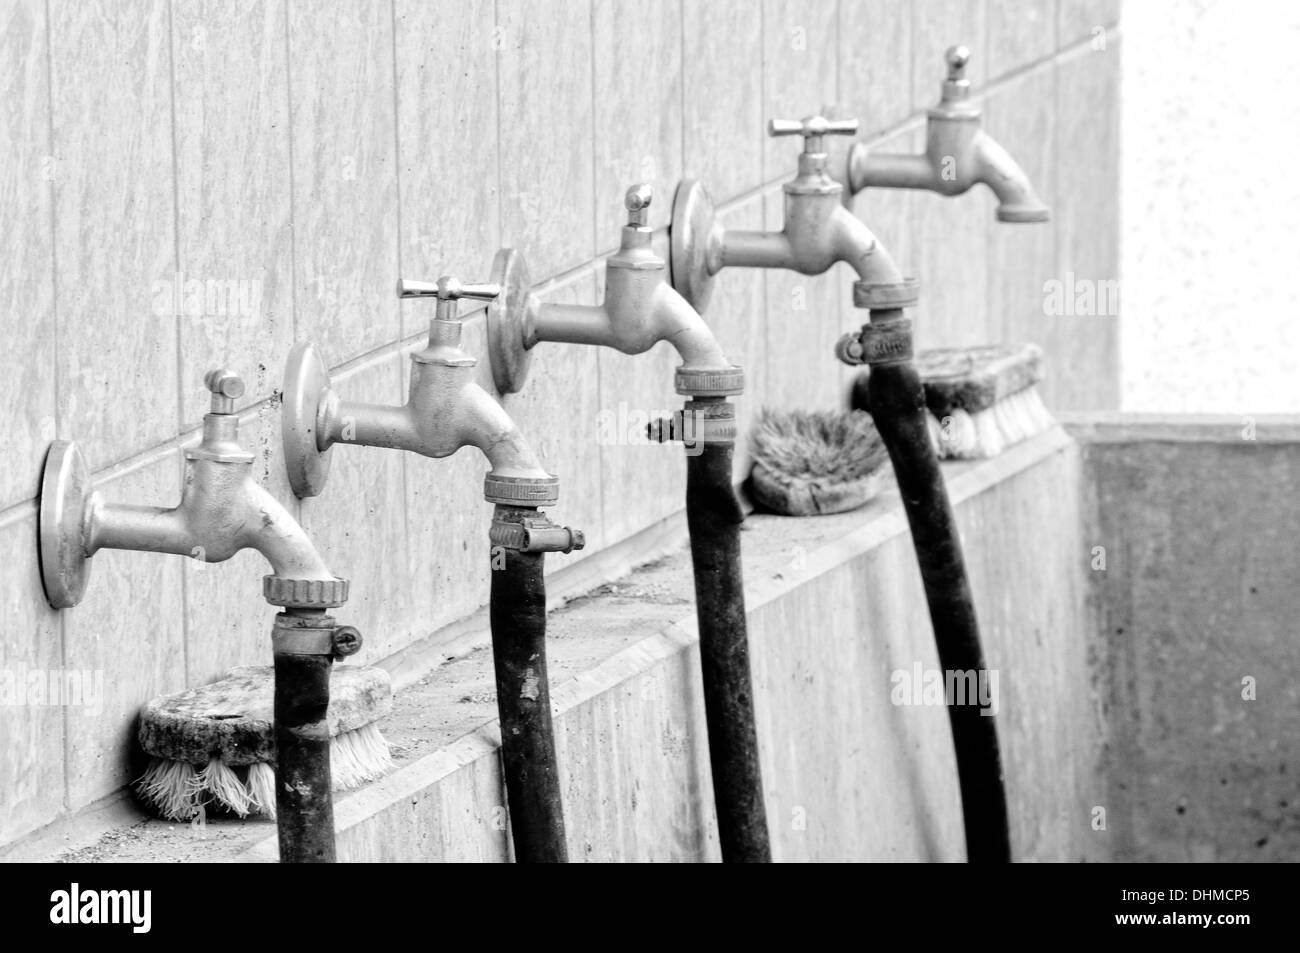 Taps on the sink black and white Stock Photo